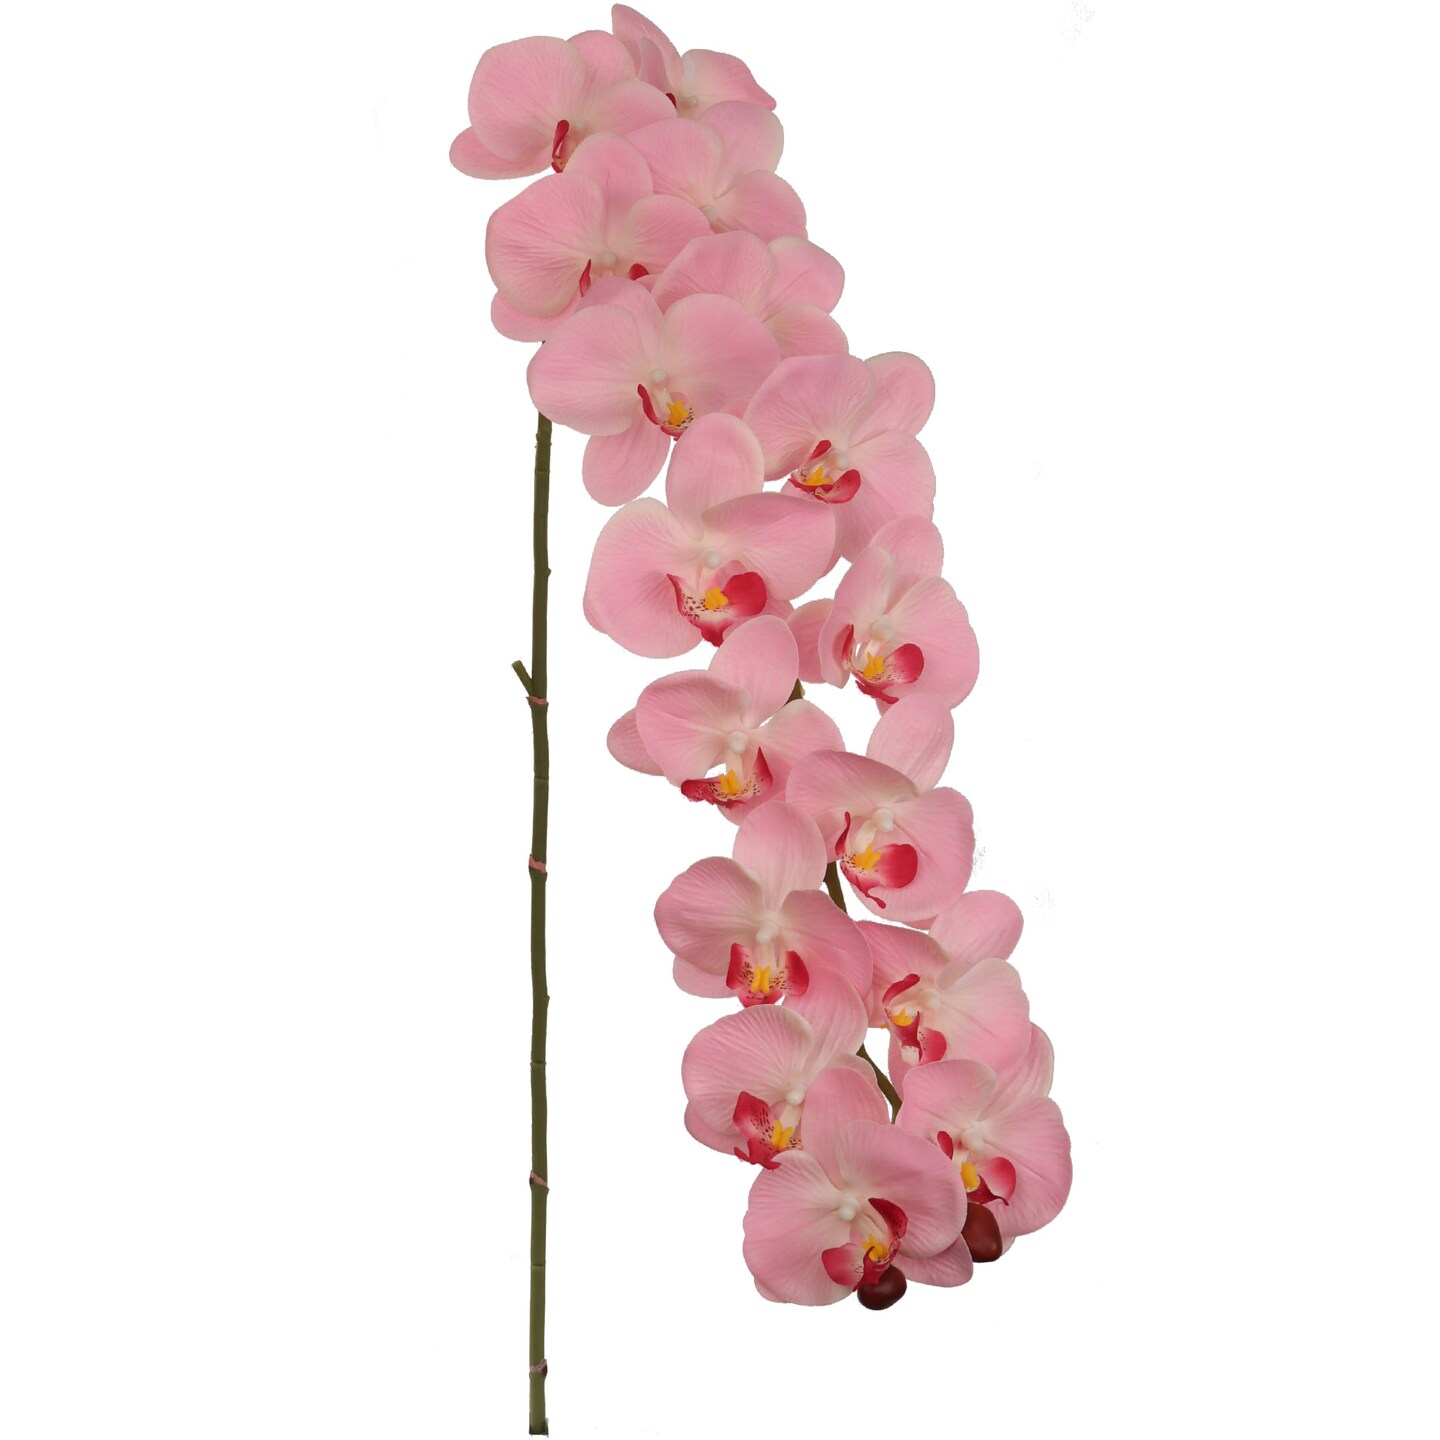 49&#x22; Massive Pink Phalaenopsis Orchid Stem, 16 Realistic Silk Flowers &#x26; Lush Green Buds, Fake Orchids, Parties &#x26; Events, Home &#x26; Office Decor